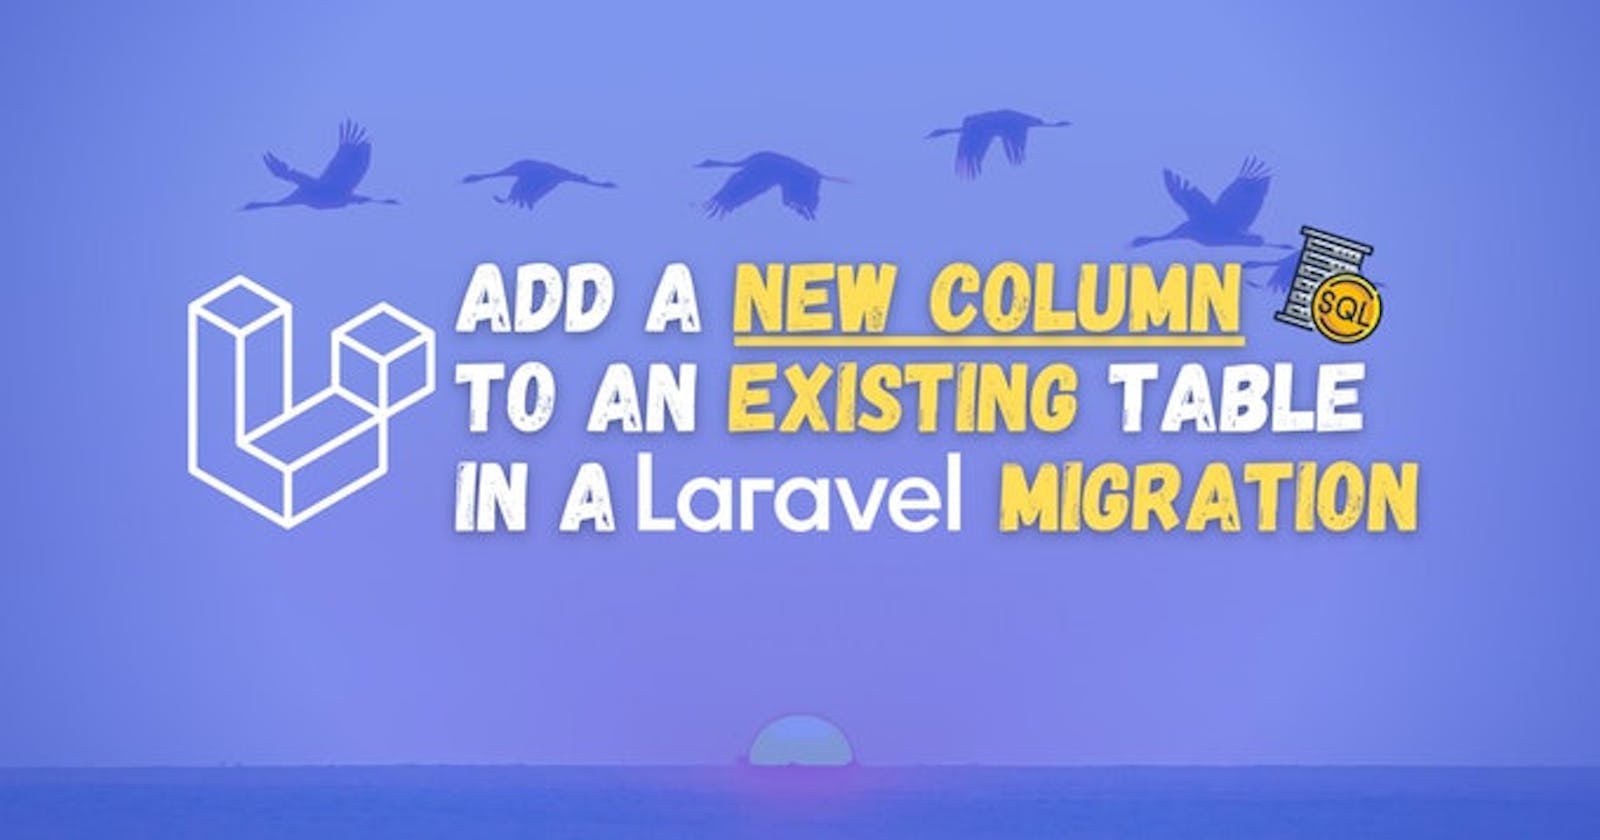 How to Add a New Column to an Existing Table in a Laravel Migration?